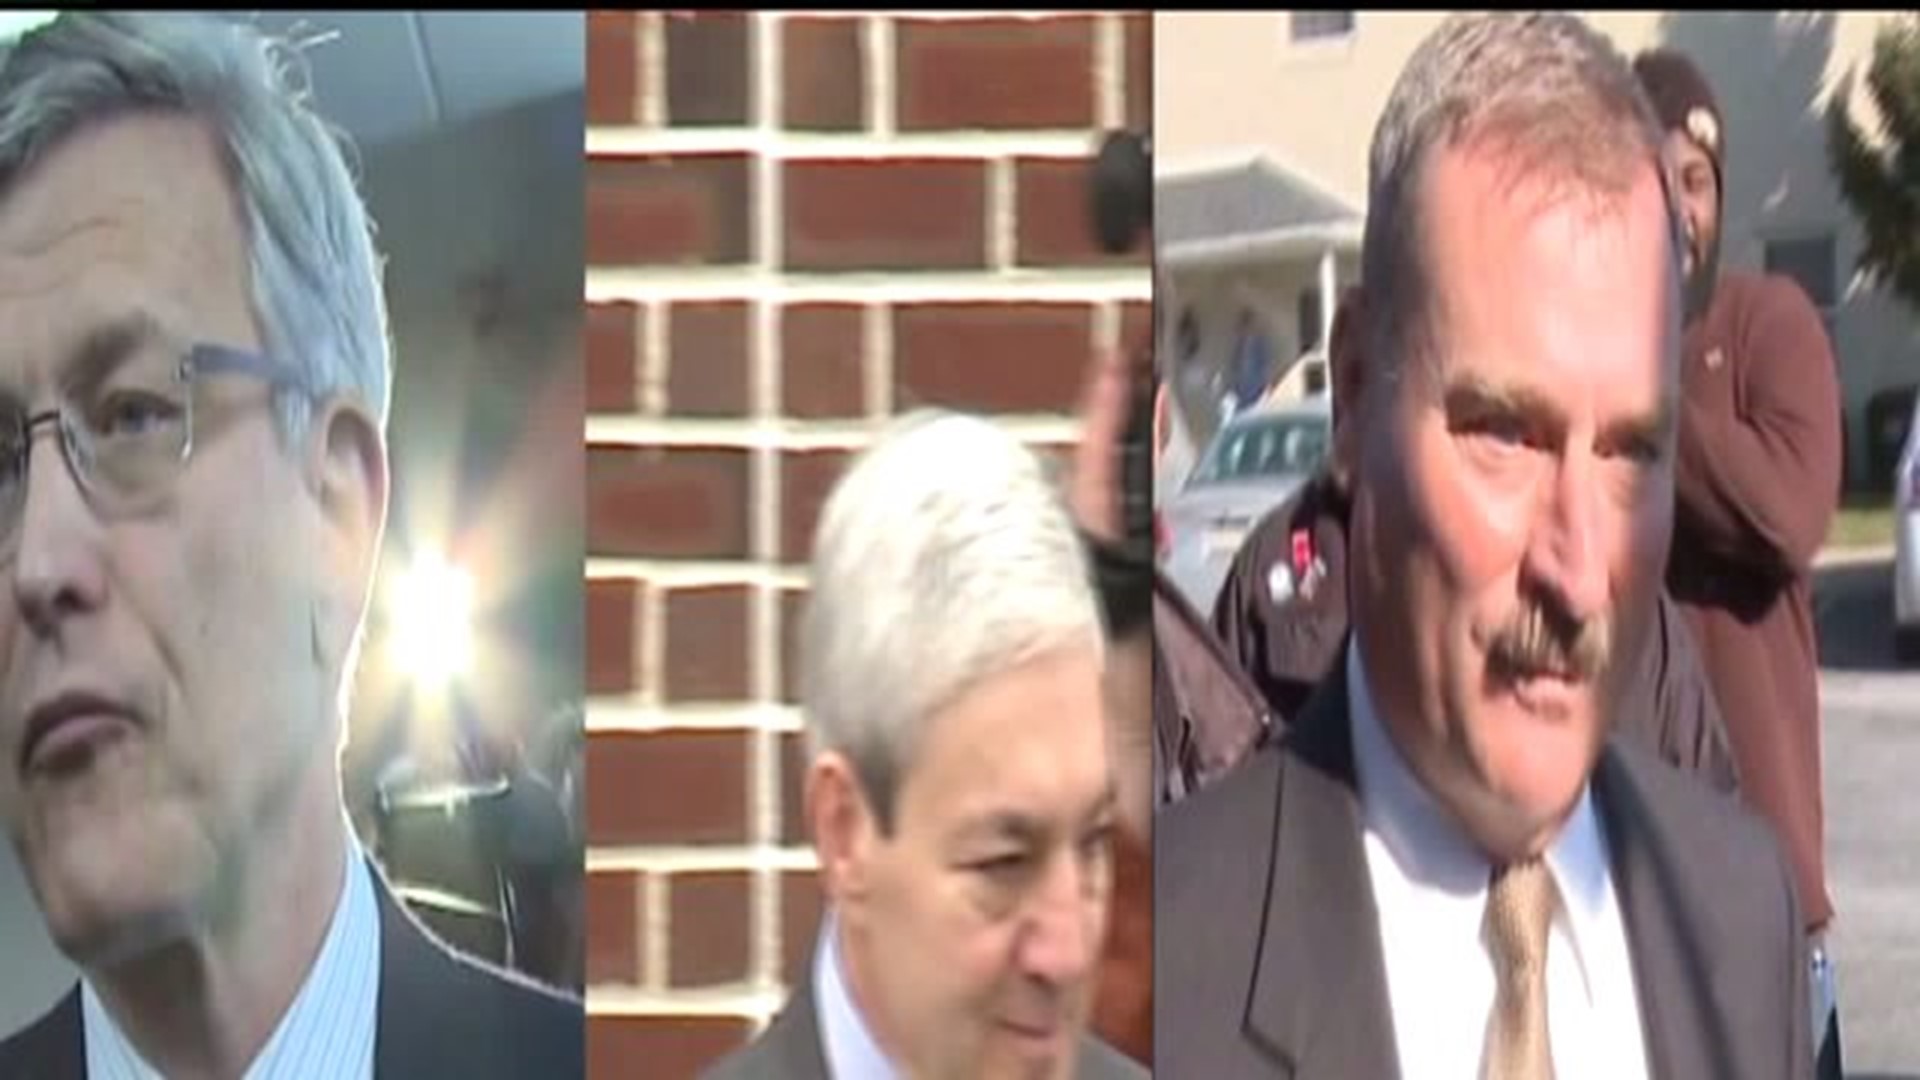 Appeals court to hear arguments in case against 3 former Penn State administrators